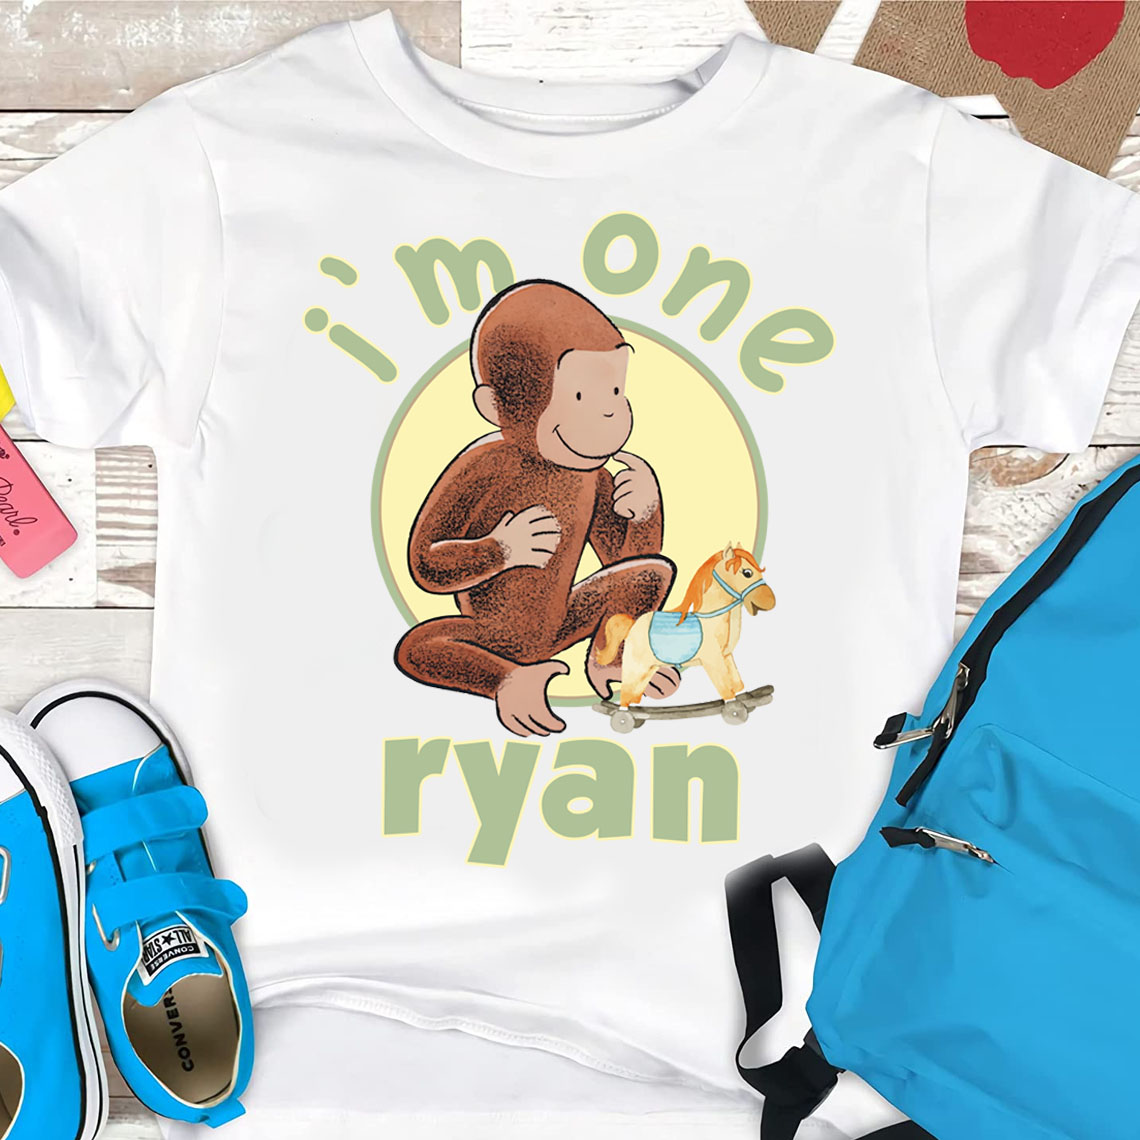 Curious George Birthday Shirts, Family Matching shirts for Curious George Birthday party Theme